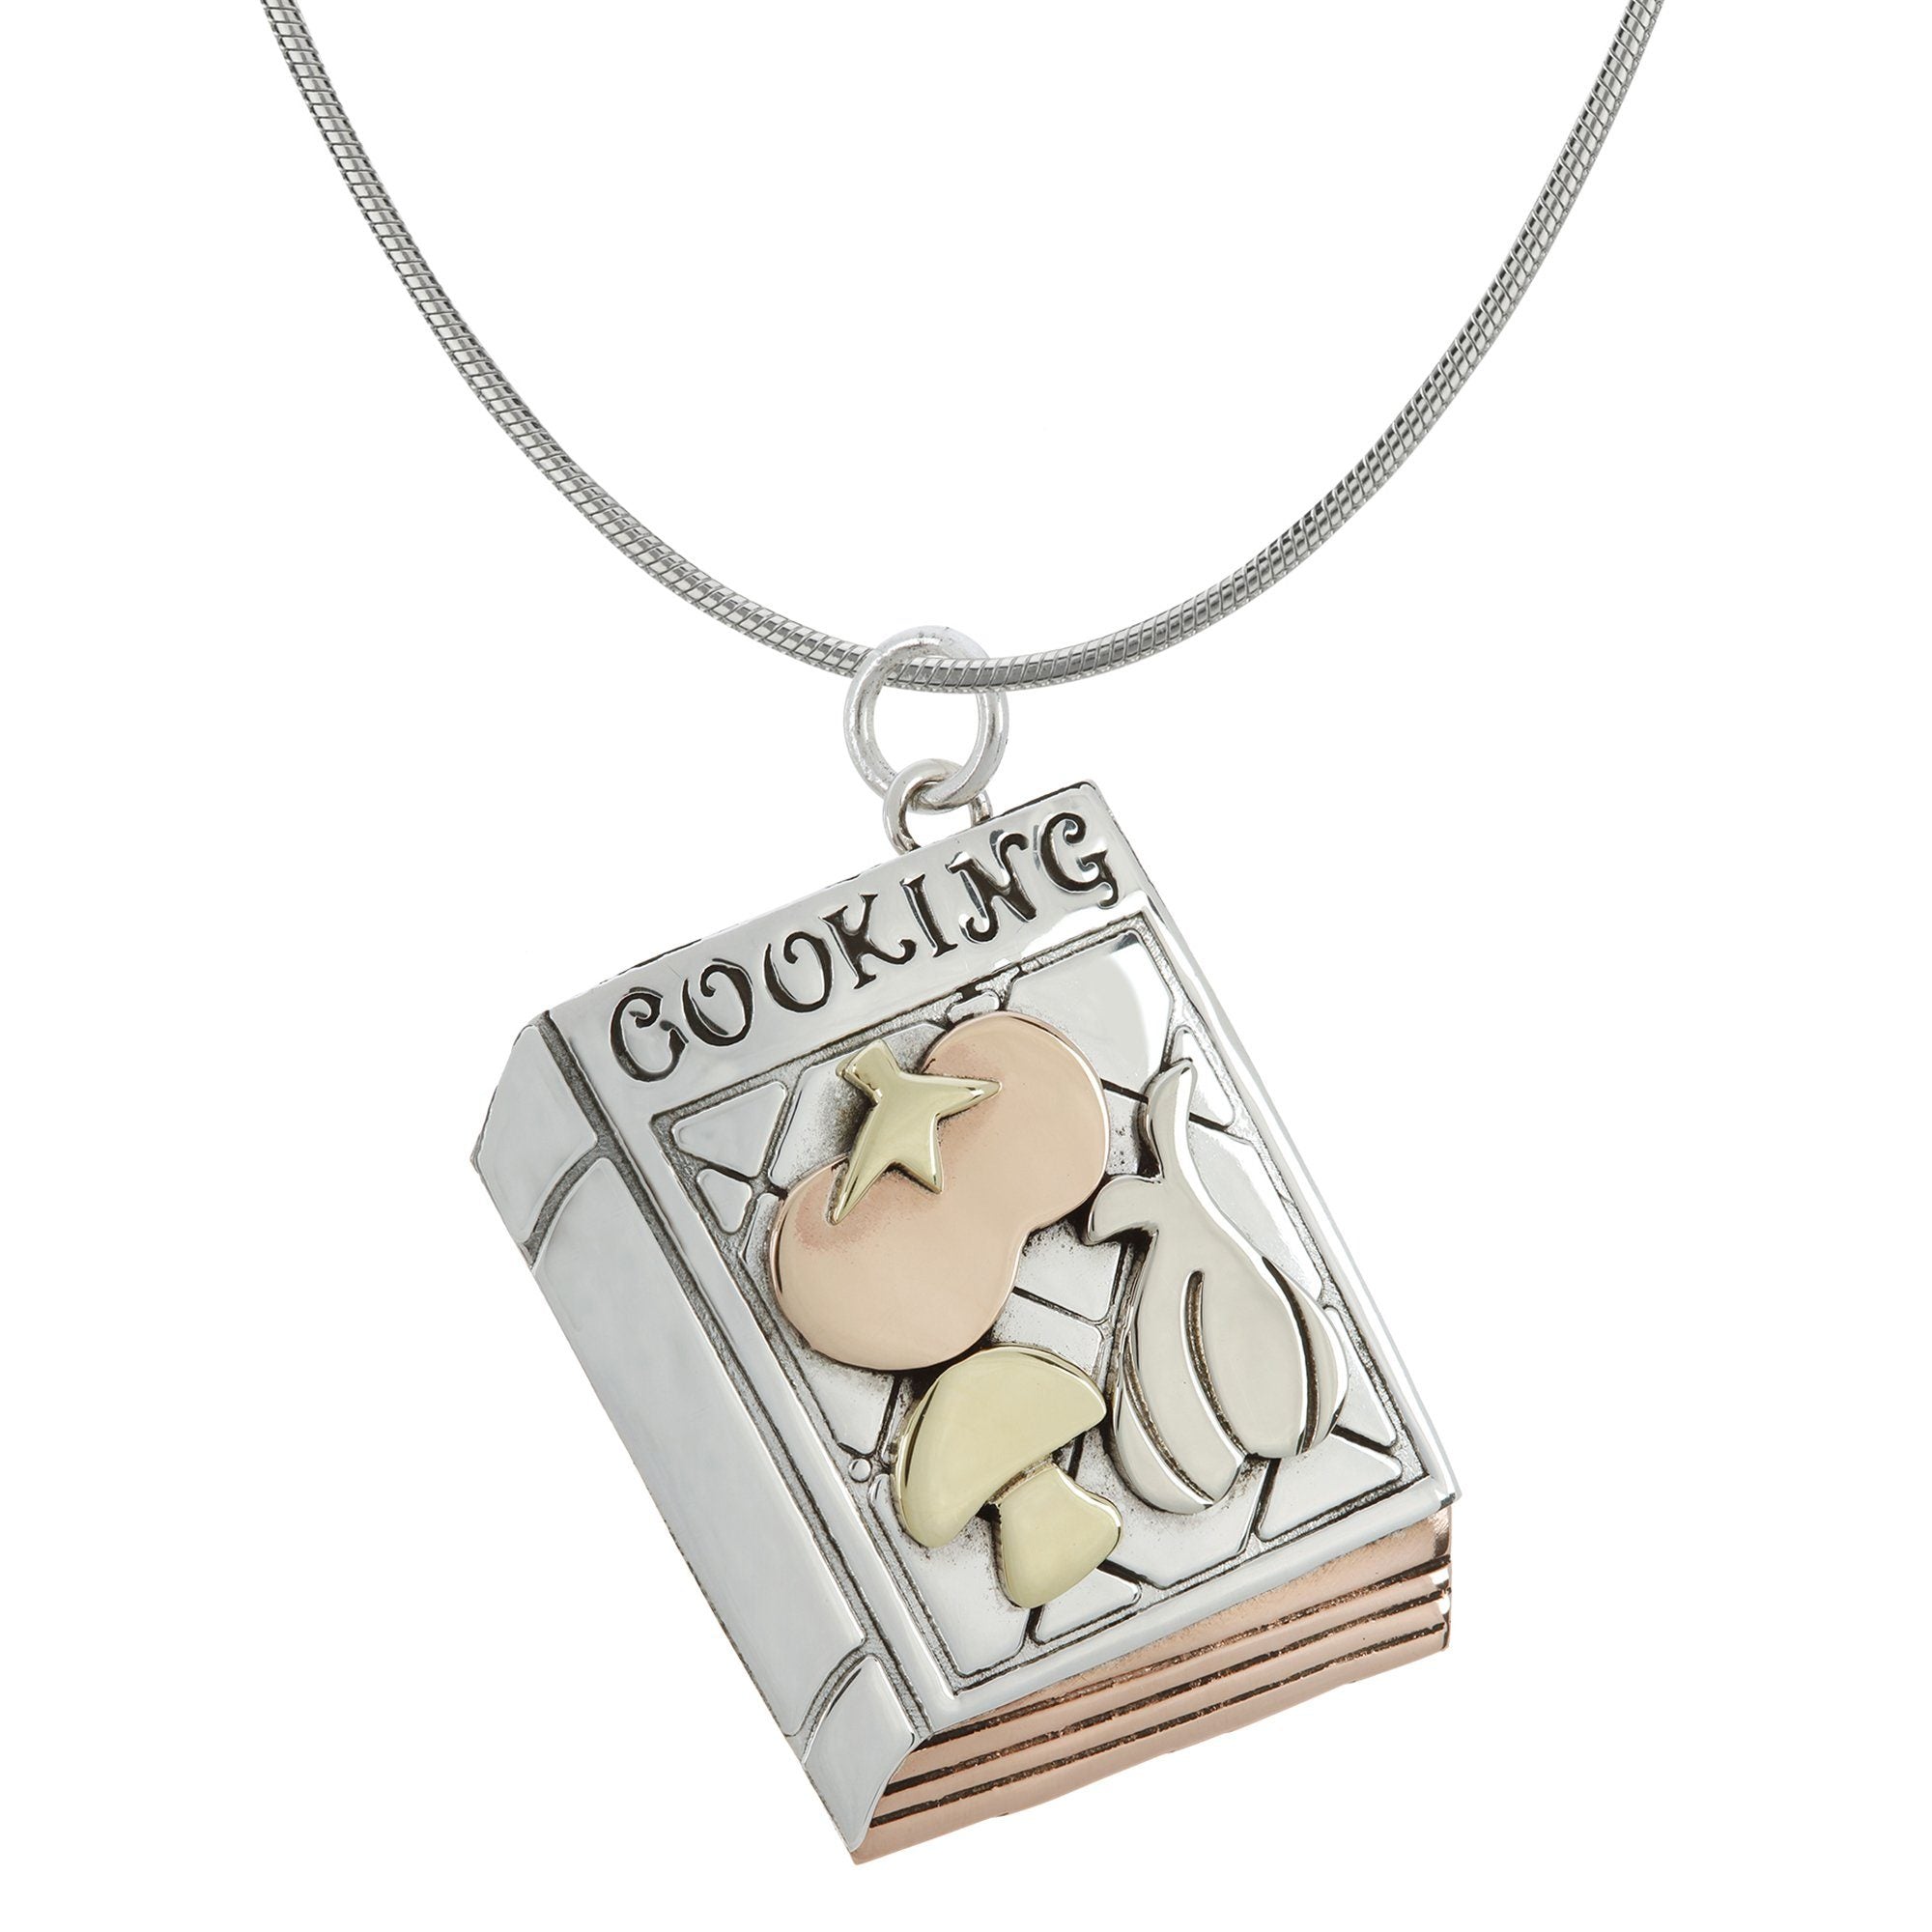 Cookbook Sterling Necklace - With Diamond Cut Chain